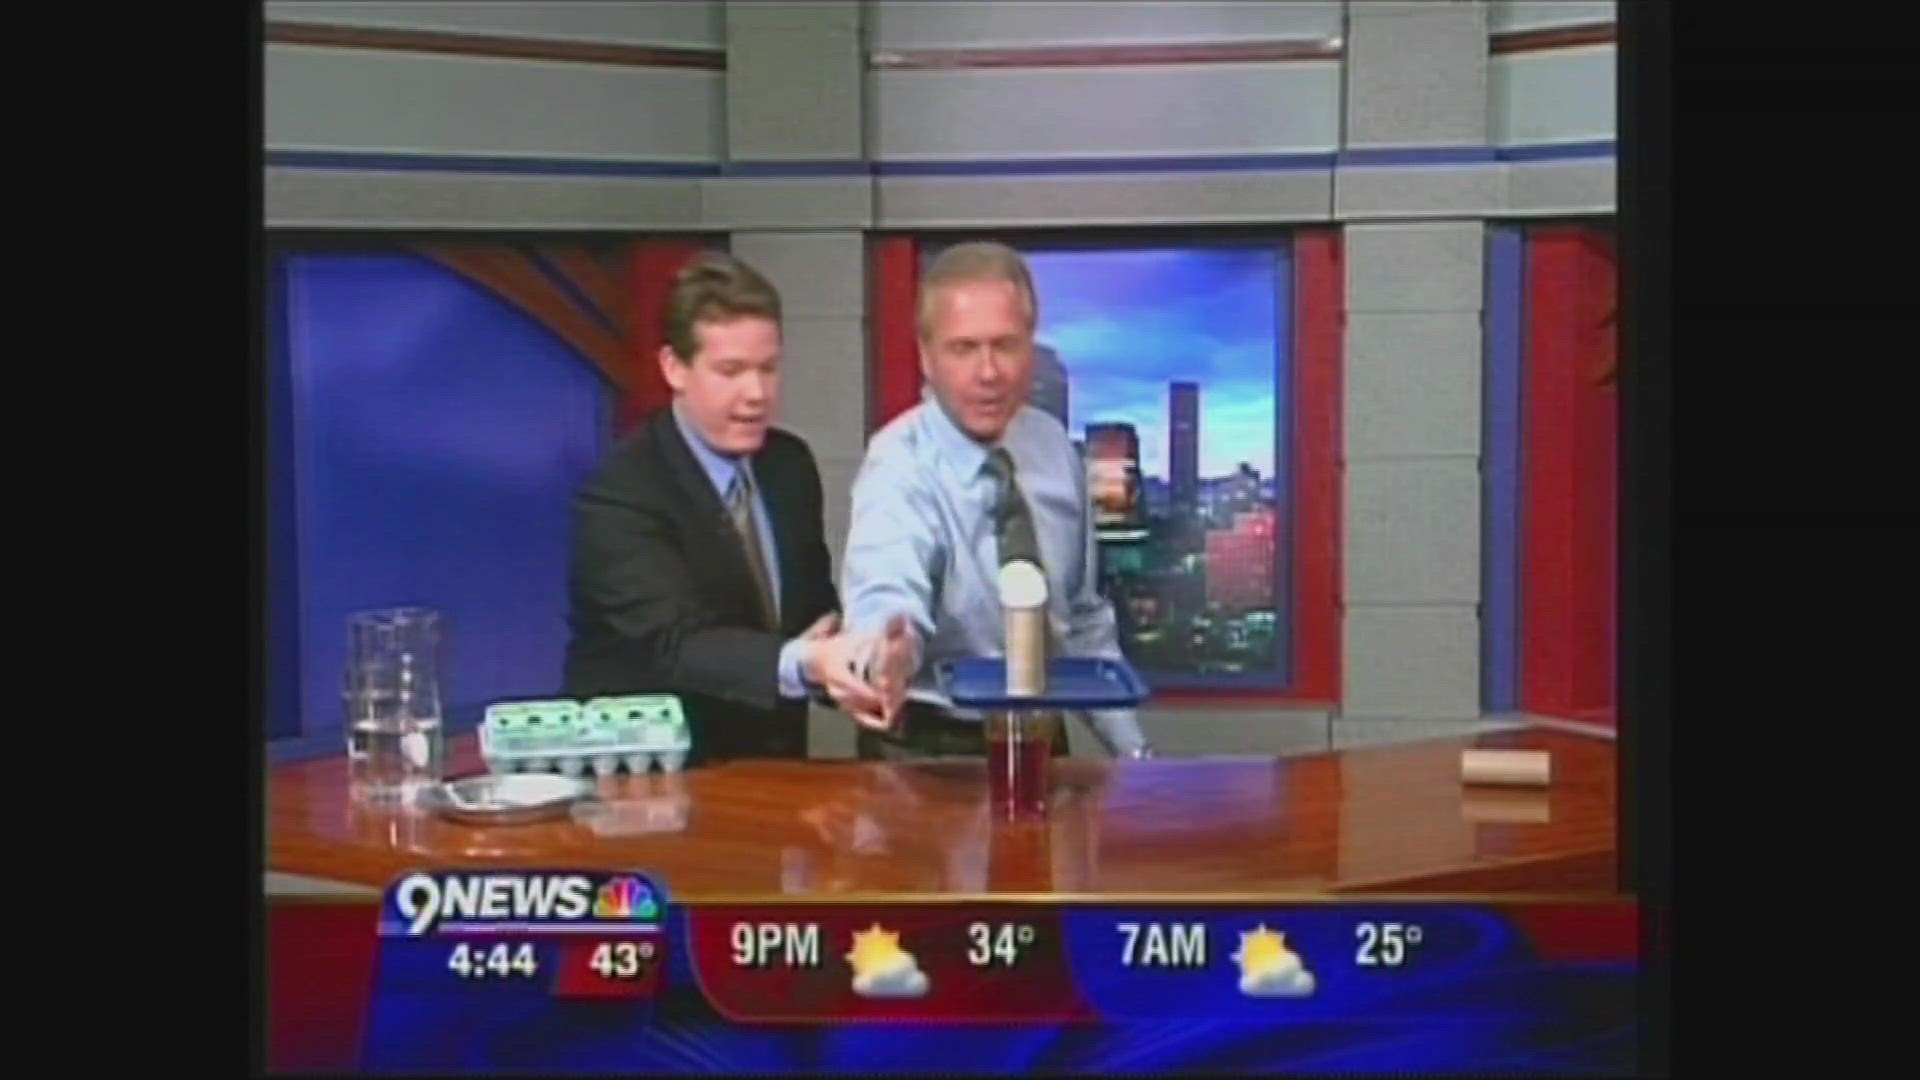 Here are some of Steve Spangler's favorite moments on 9NEWS.